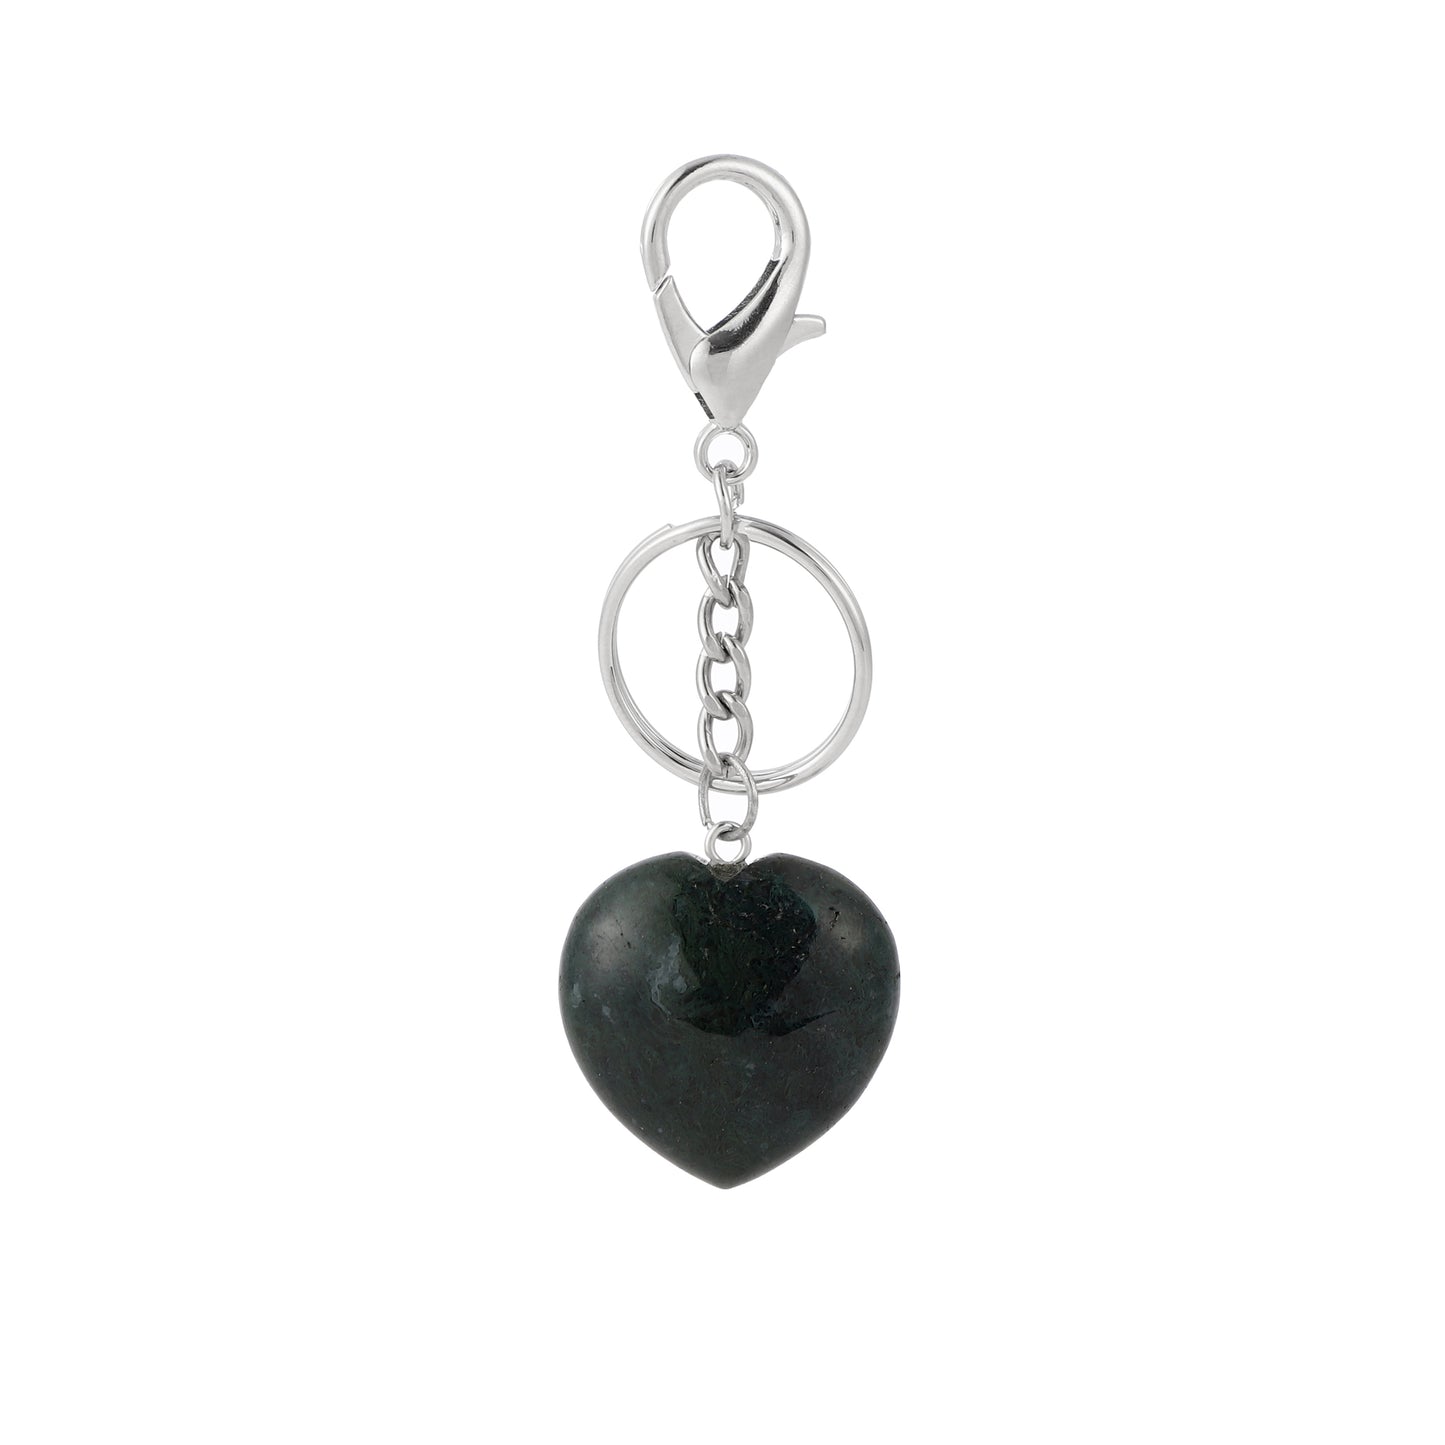 30 Heart Keychain - Symbolize Love and Style with Our Heart-shaped Keychain